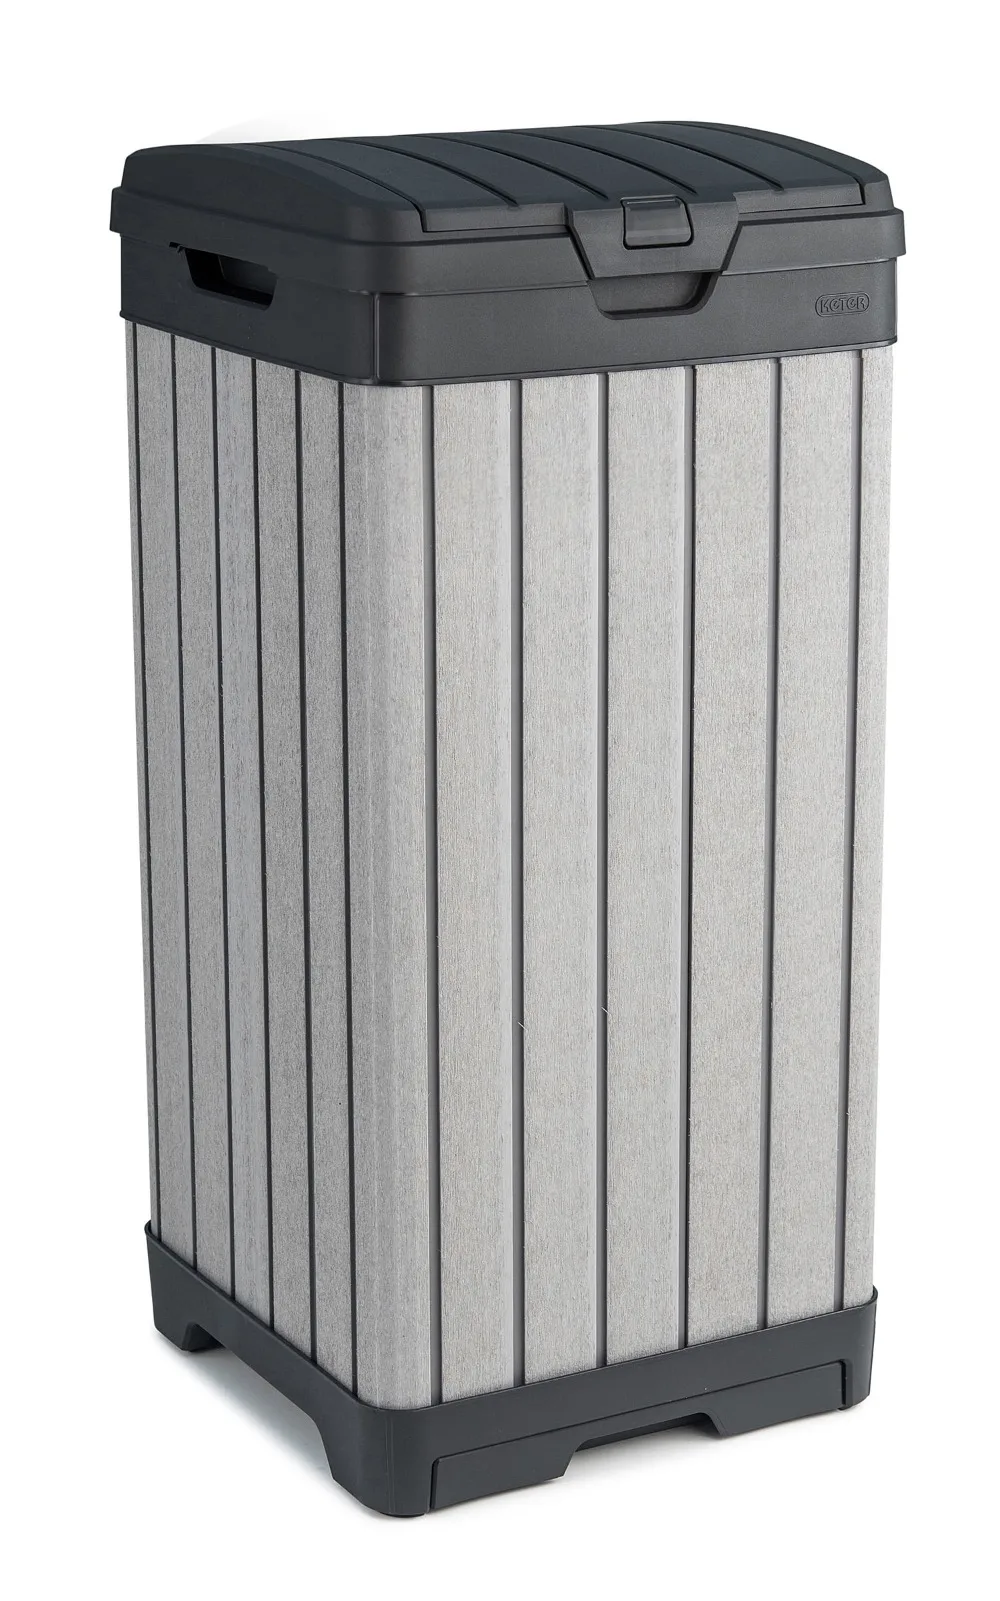 

Keter Rockford Duotech Outdoor Garbage Can, Gray, Heavy duty plastic